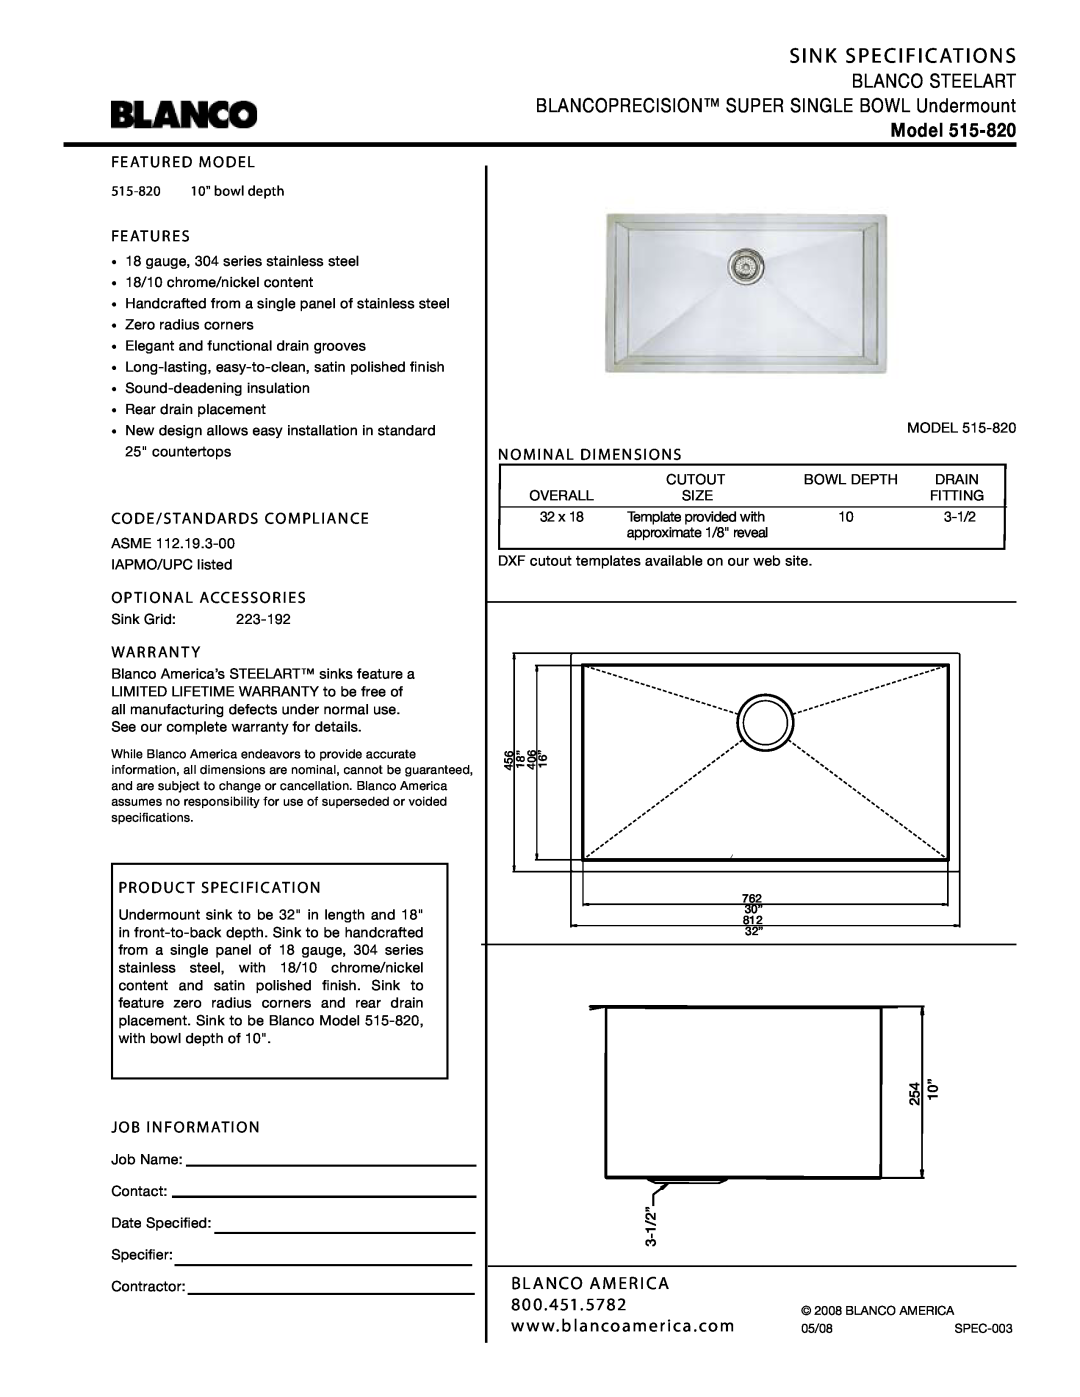 Blanco 515-820 warranty Sink Specifications, Blanco America, 800, Featured Model, Features, Code/Standards Compliance 